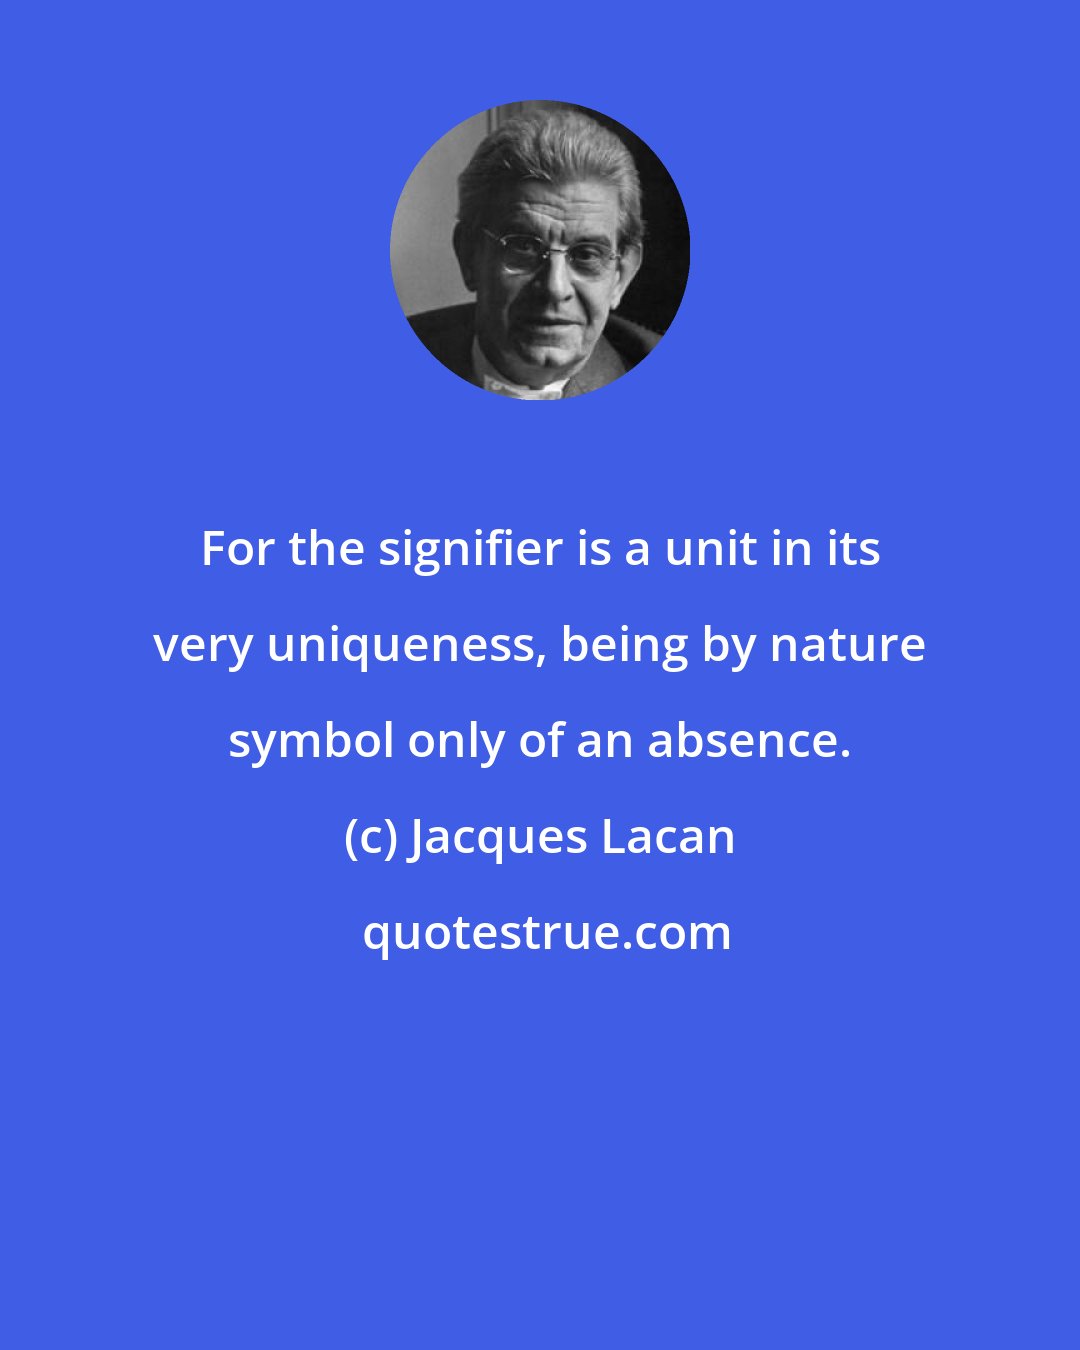 Jacques Lacan: For the signifier is a unit in its very uniqueness, being by nature symbol only of an absence.